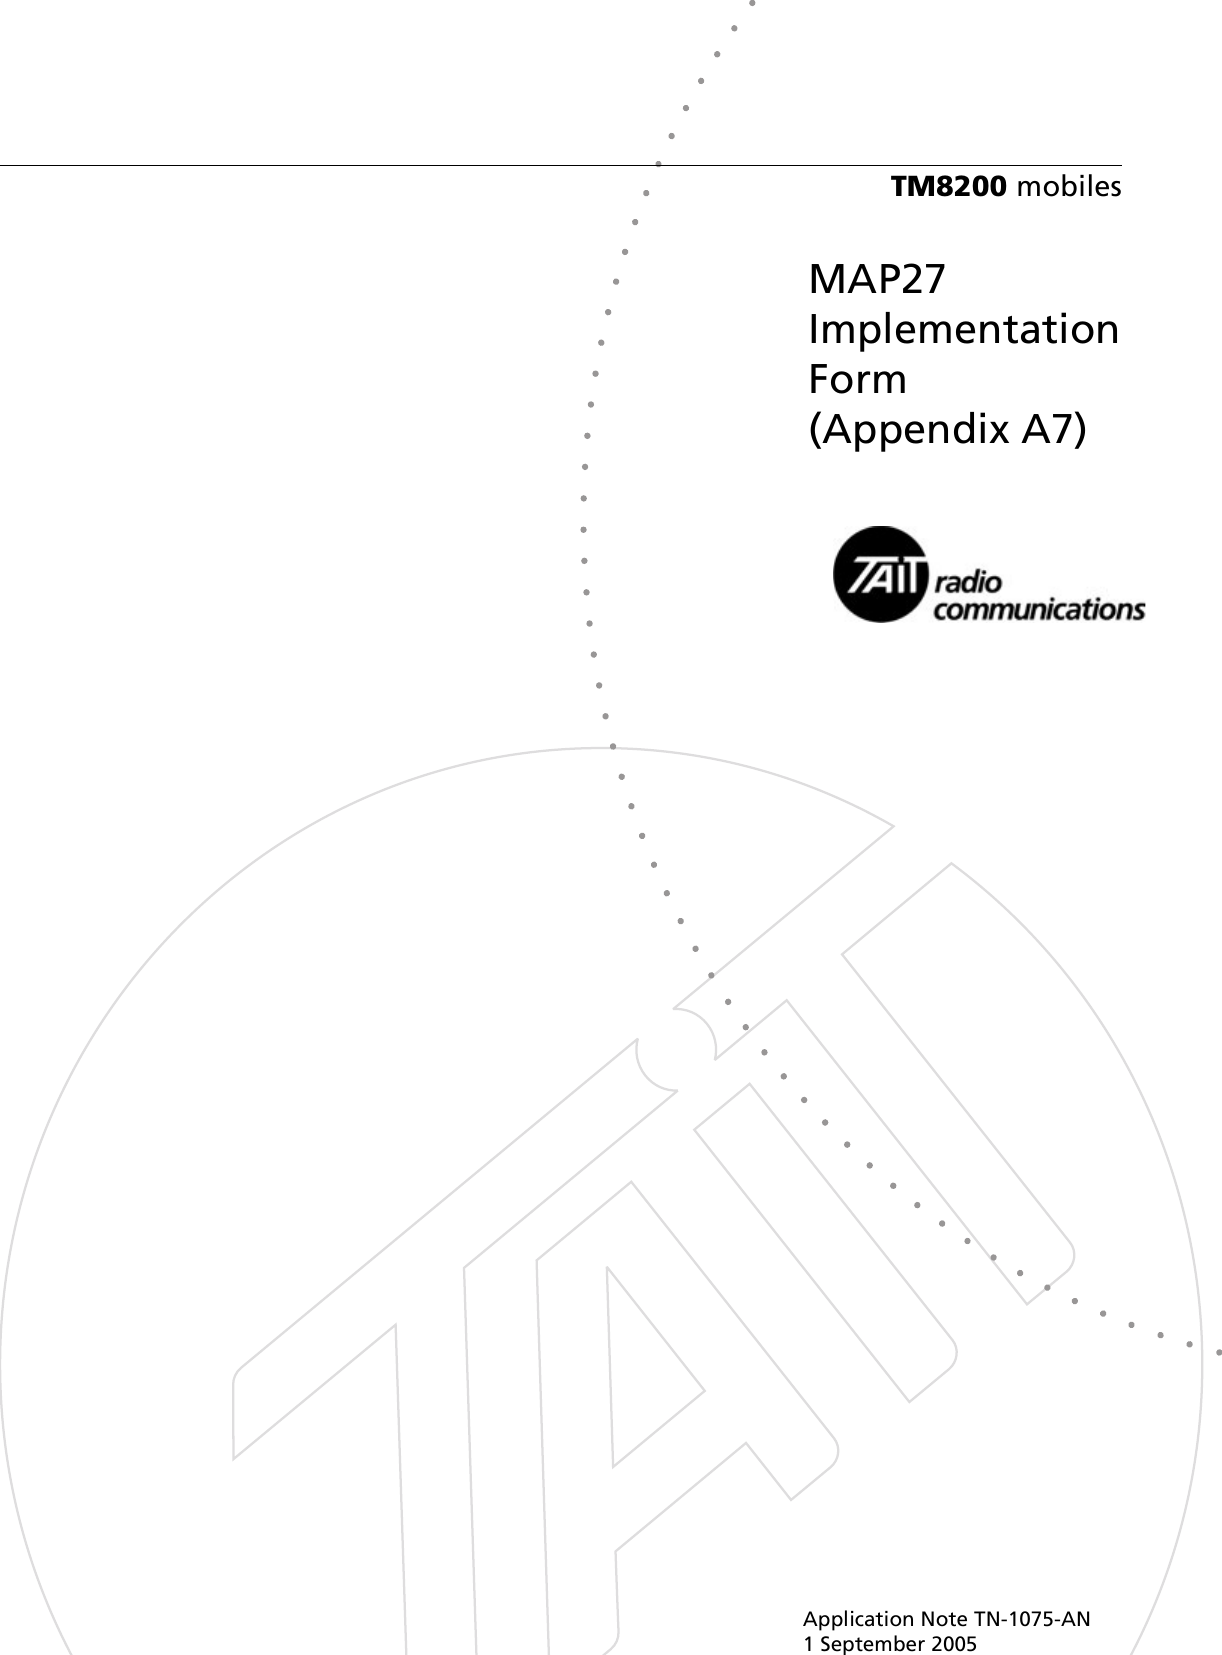 Page 1 of 11 - MAP27 Implementation Form TECHNOTE/TM8000/TN-1075-AN_TM8200 TN-1075-AN TM8200